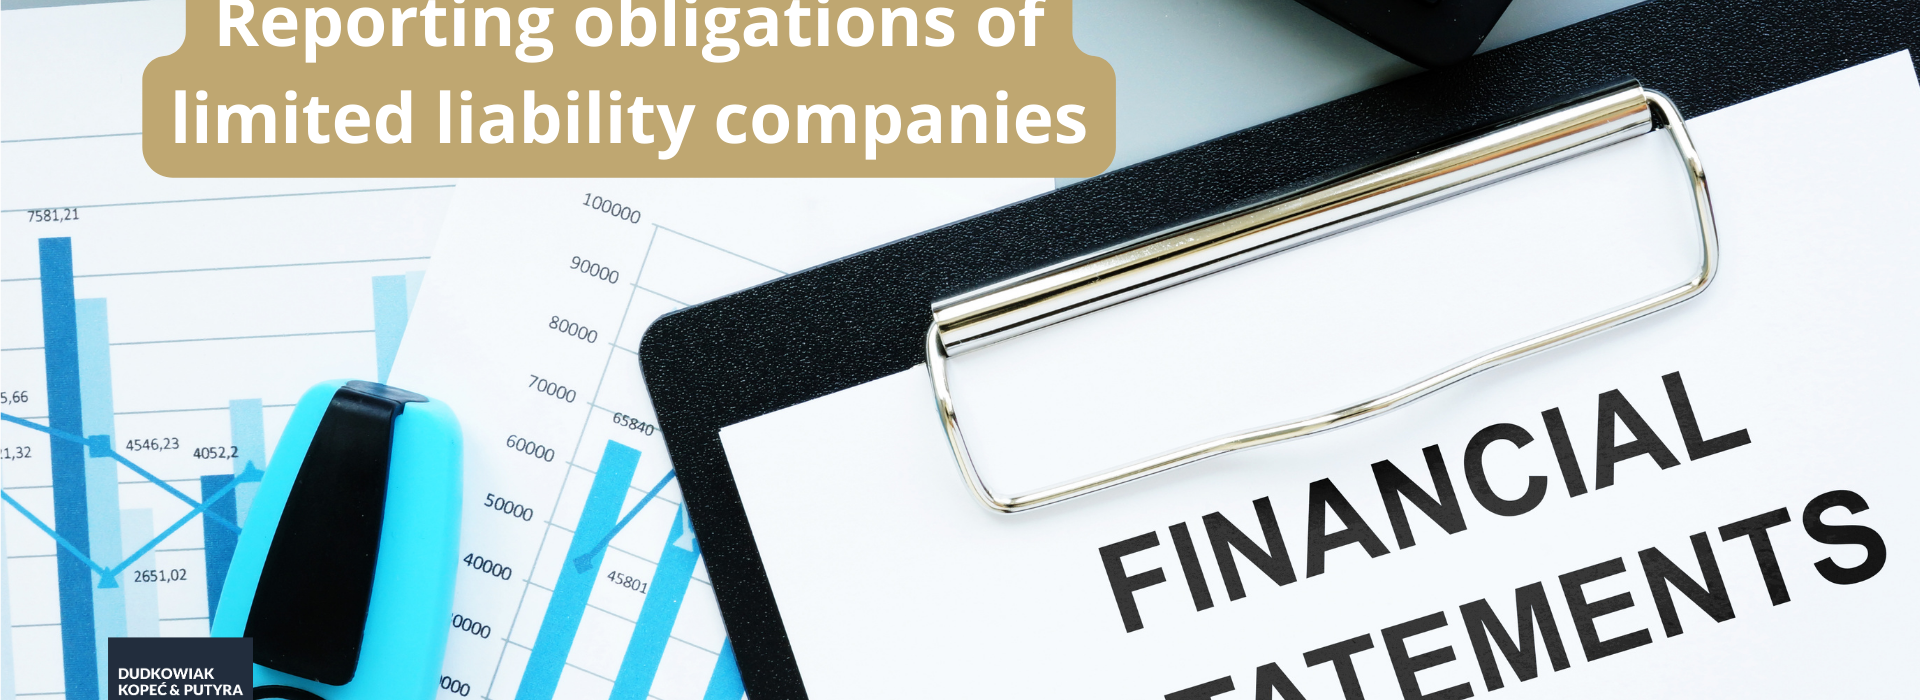 Reporting obligations of companies in Poland